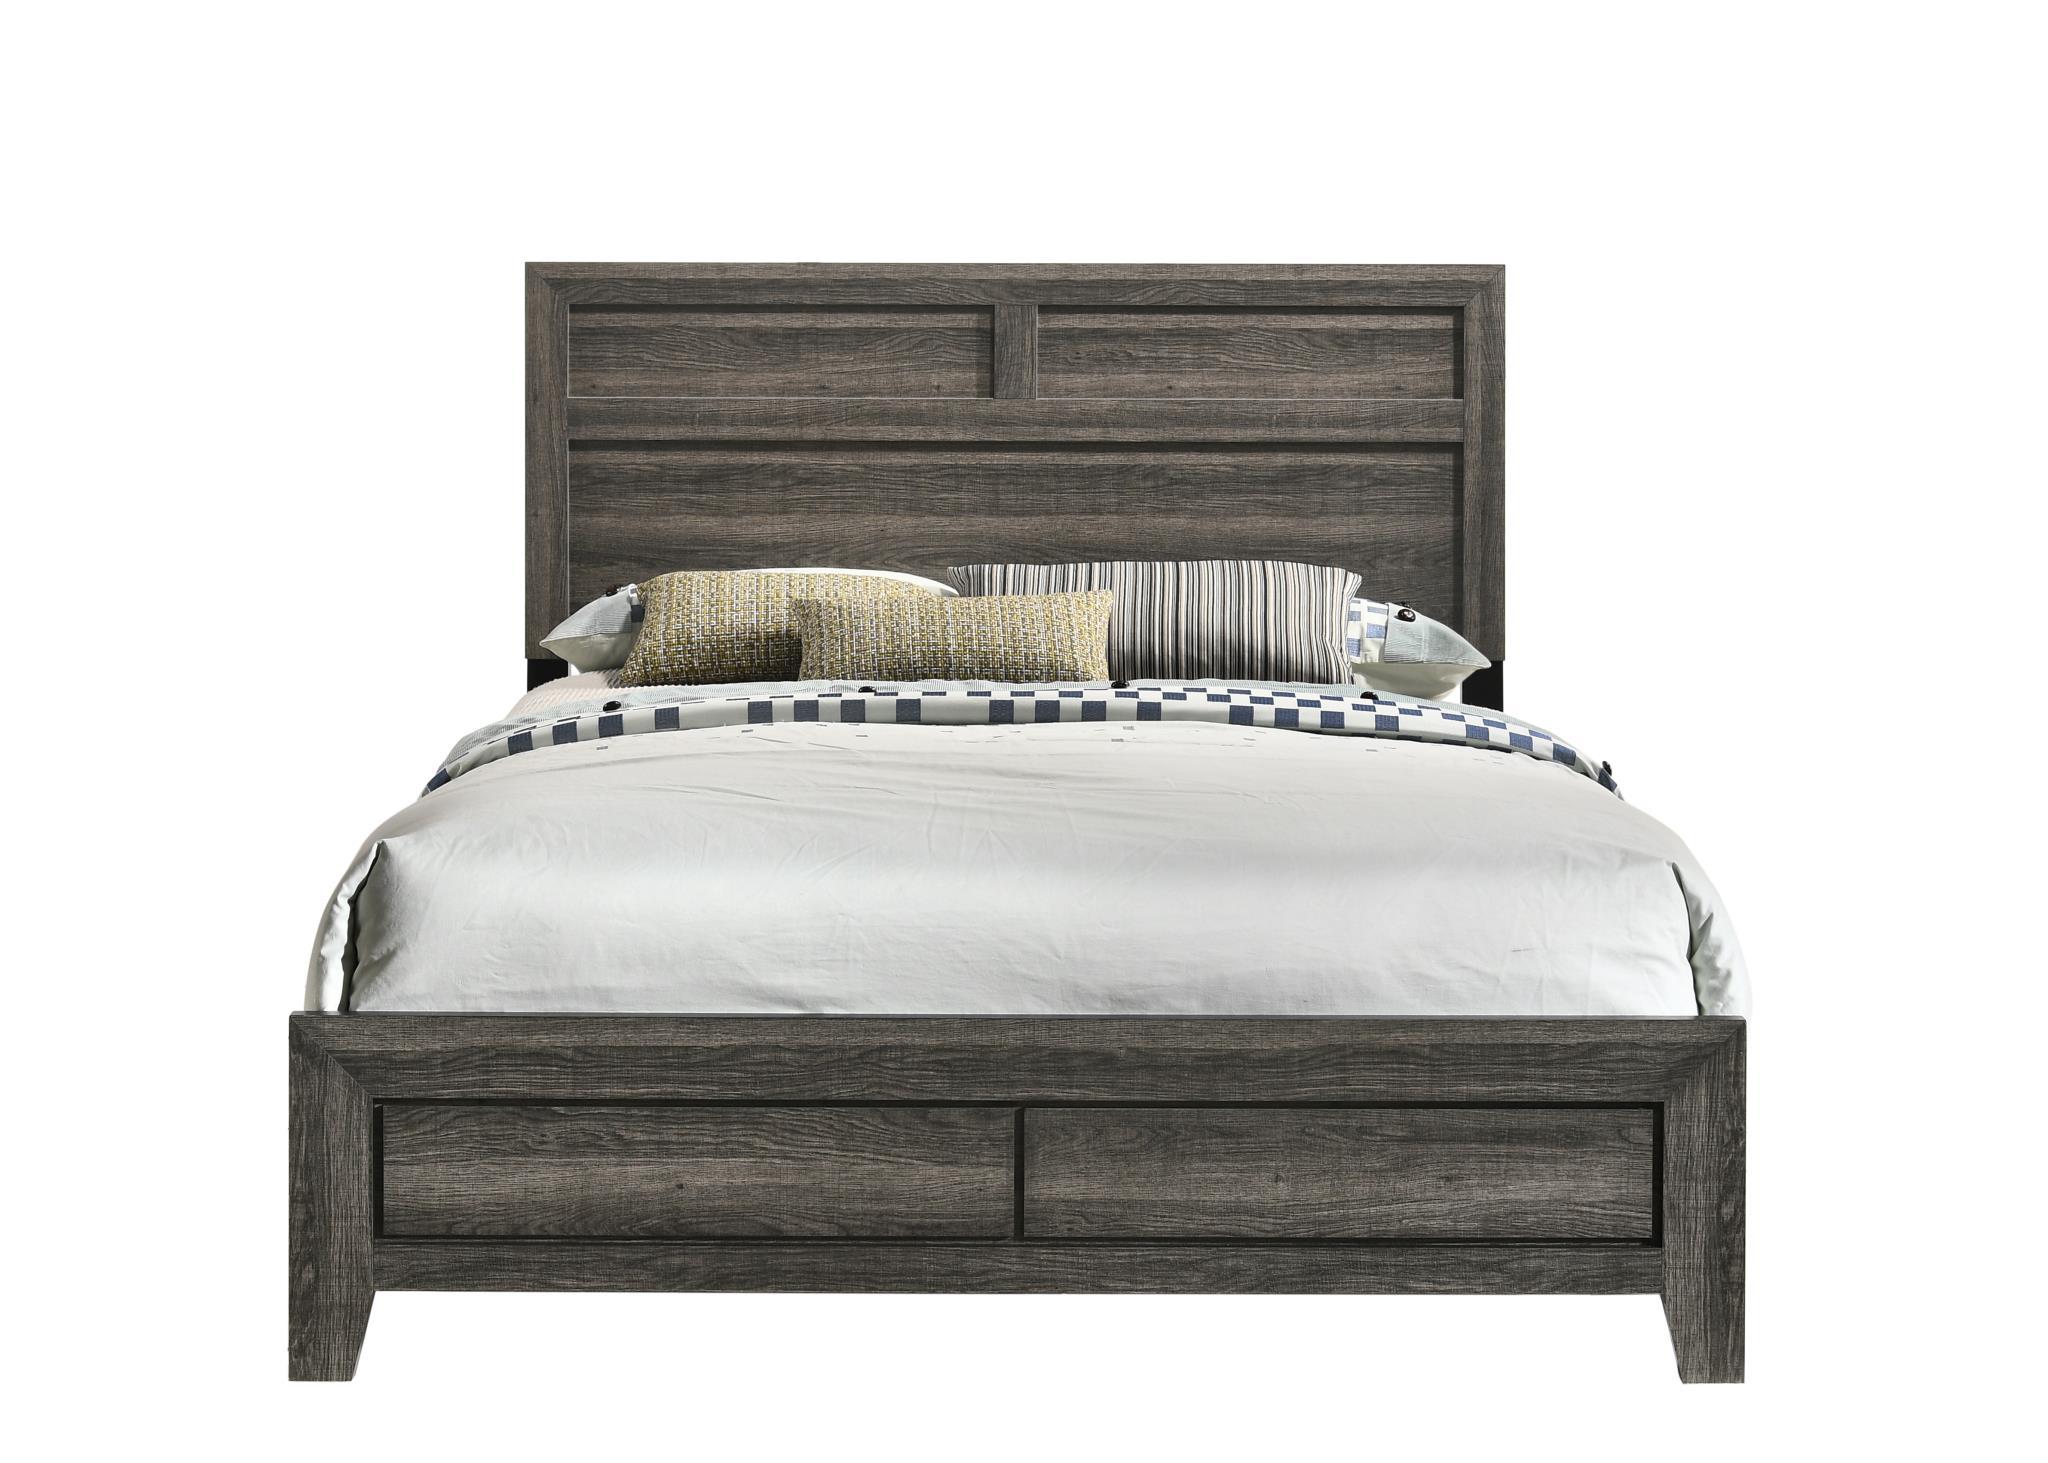 Modern, Transitional Beds ISAAC 1370-105 1370-105 in Gray 